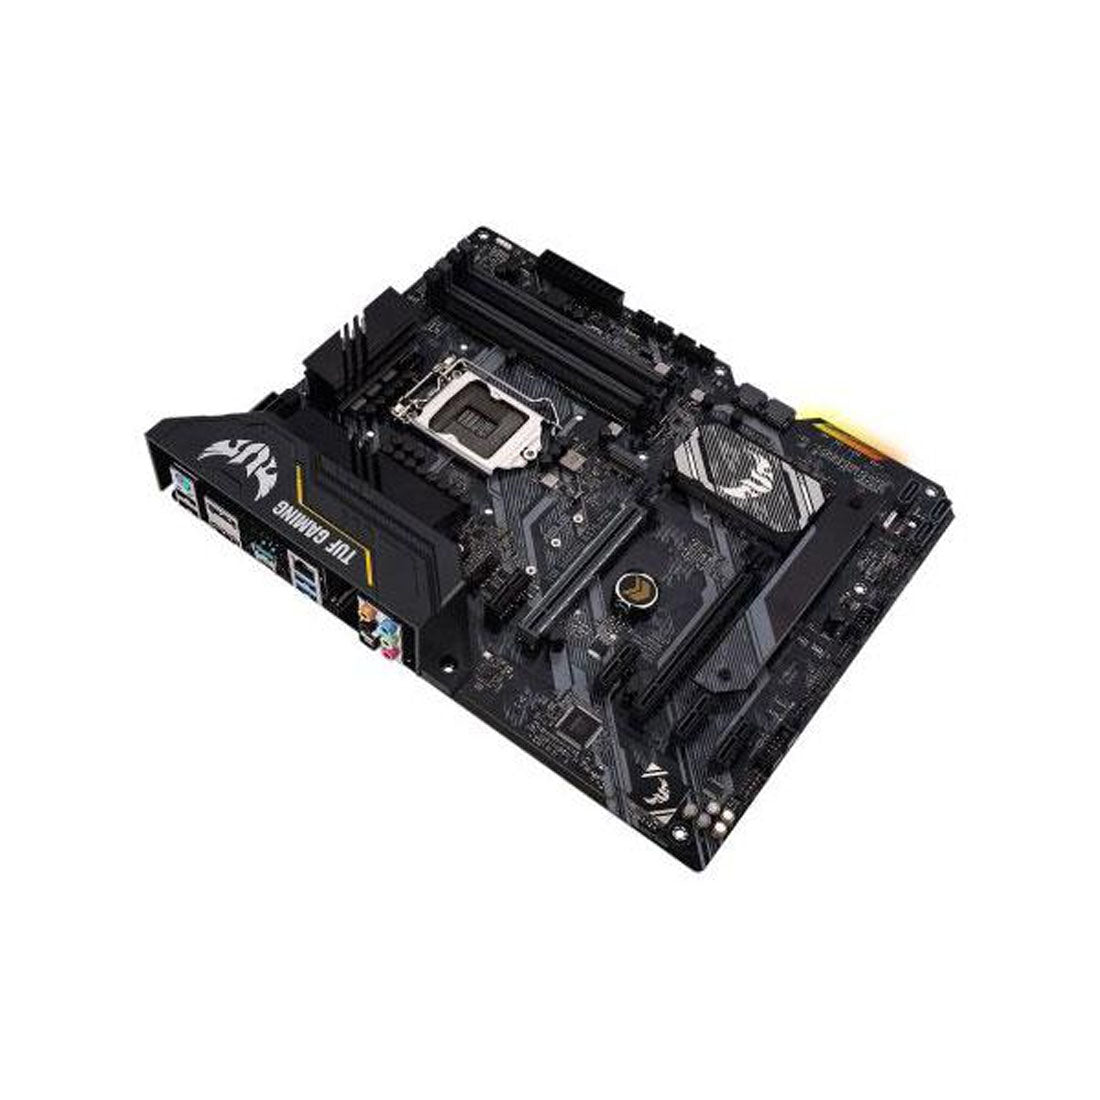 ASUS TUF Gaming H470-Pro LGA 1200 ATX Motherboard with Aura Sync RGB and Thunderbolt 3 Support